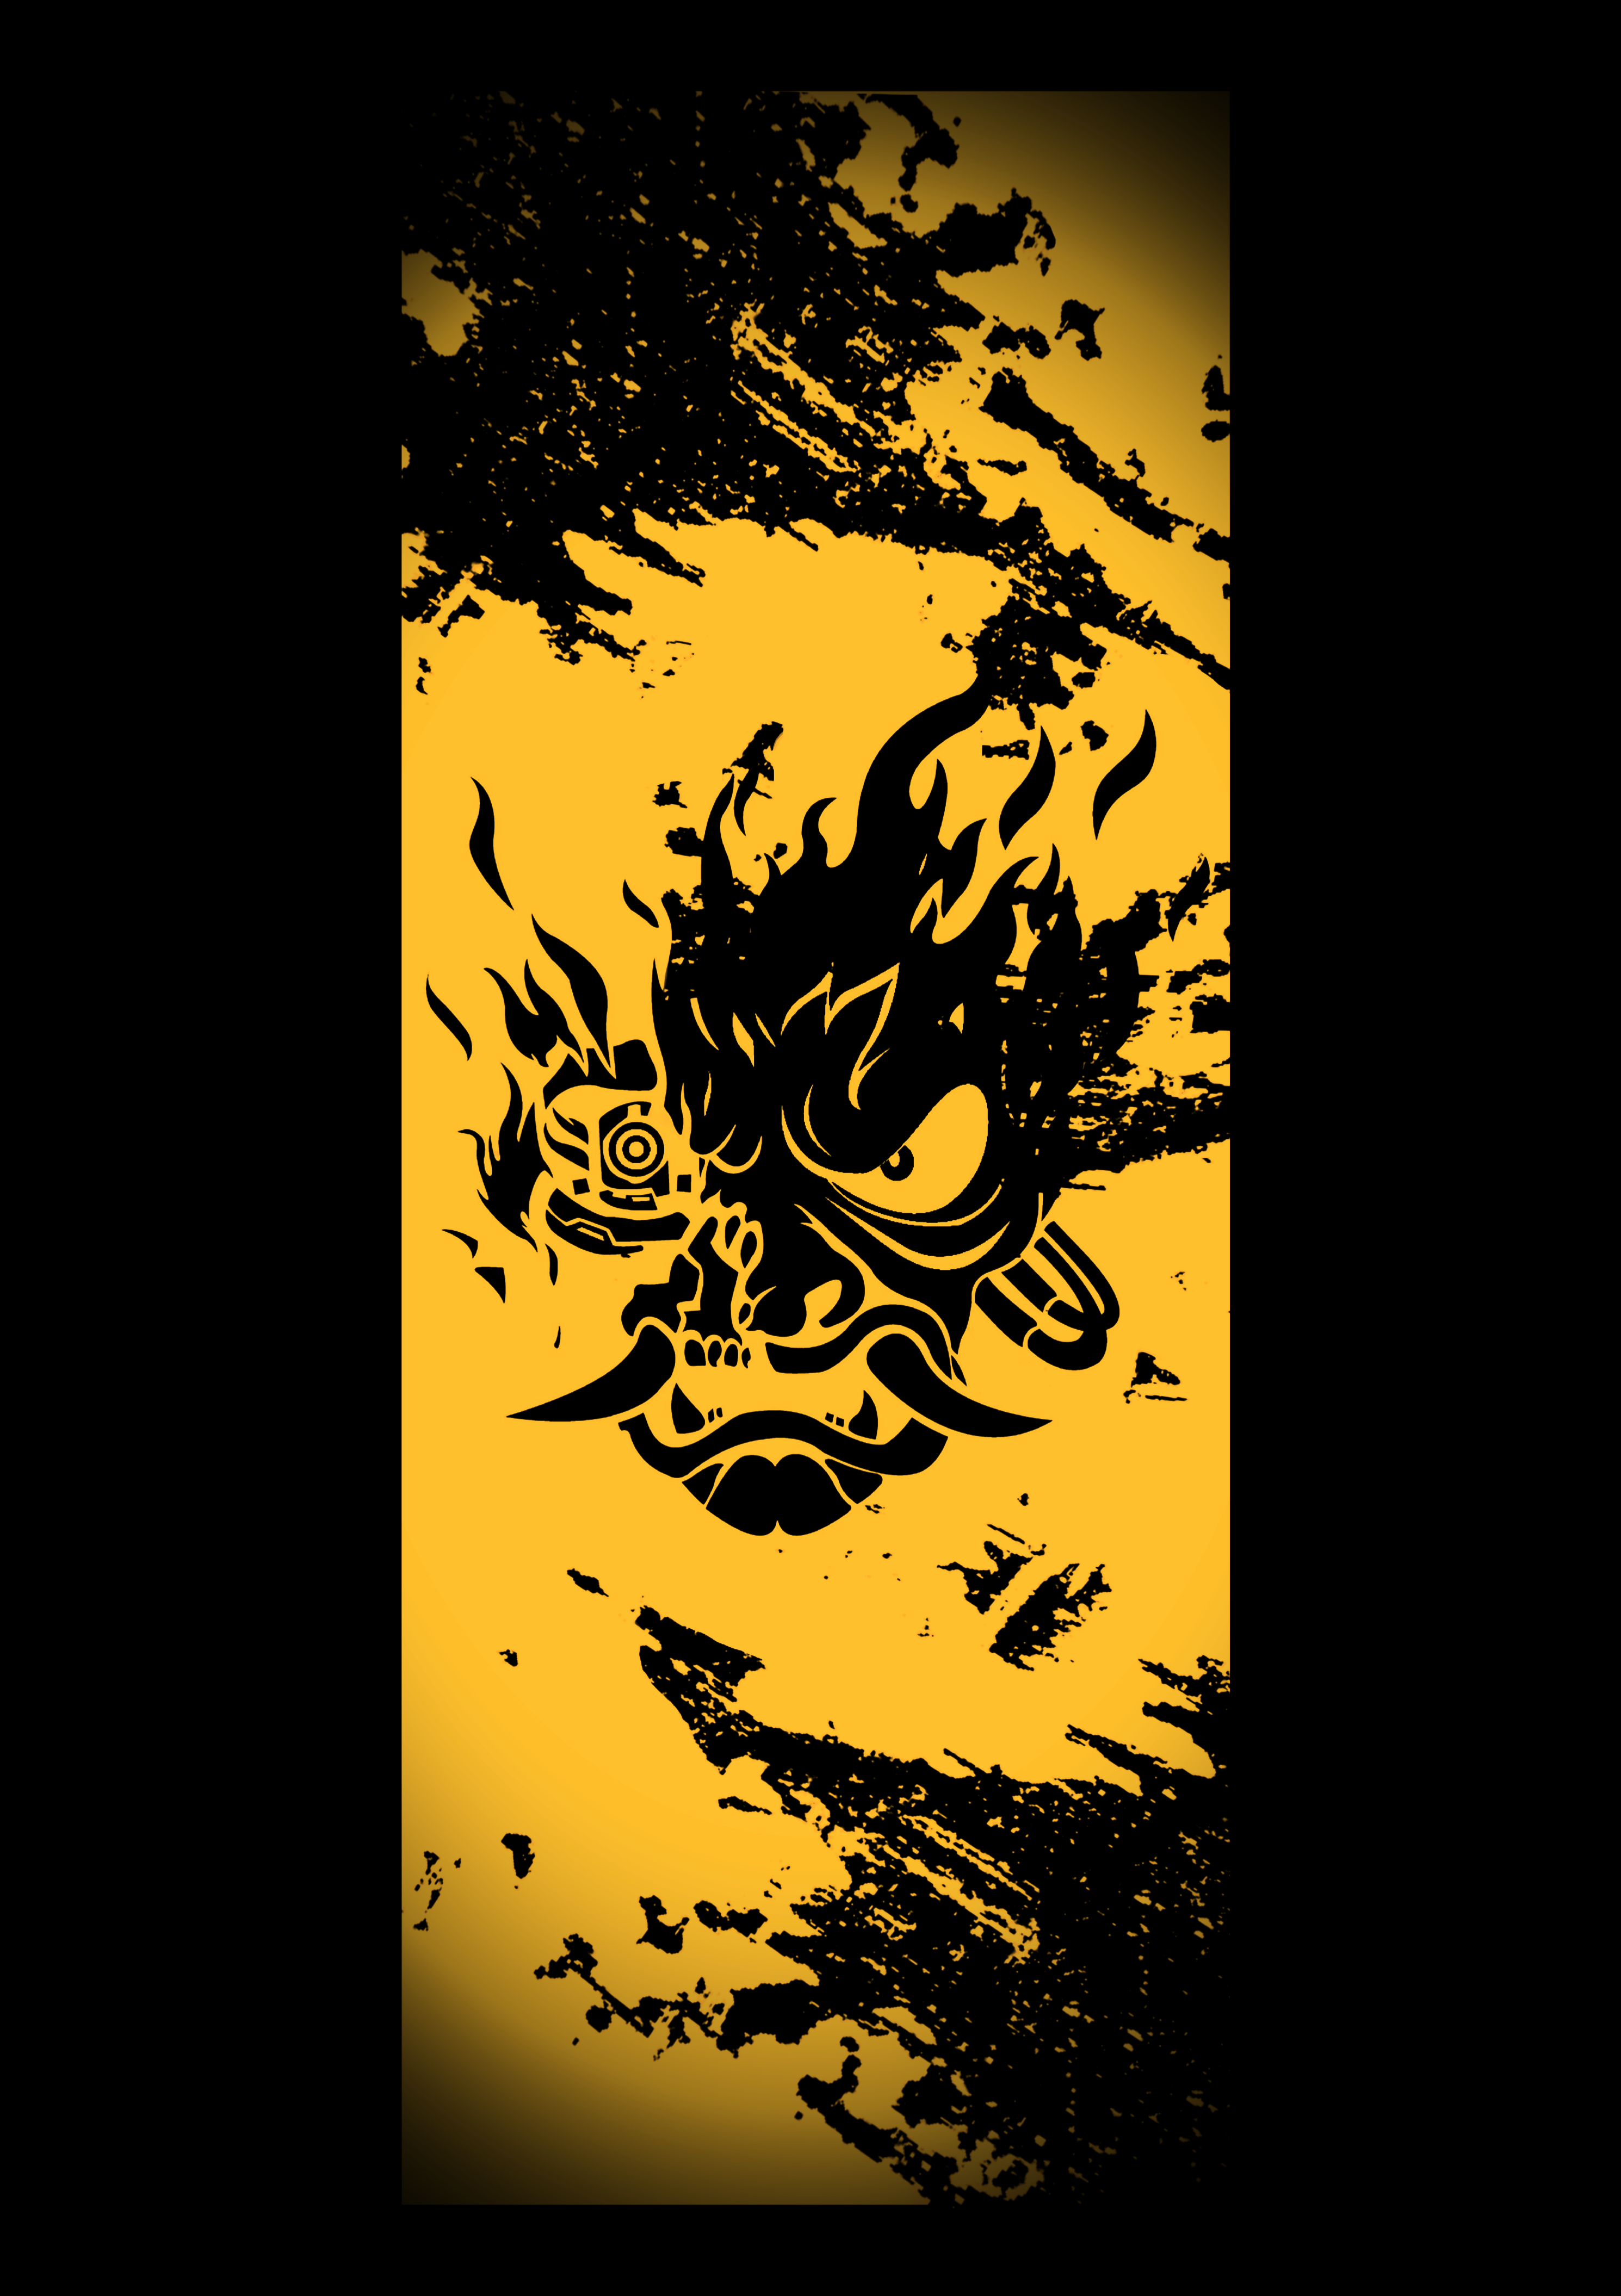 Used the Samurai Oni to make this phone wallpaper for you guys. Hope you all like it! [2980 X 4222]